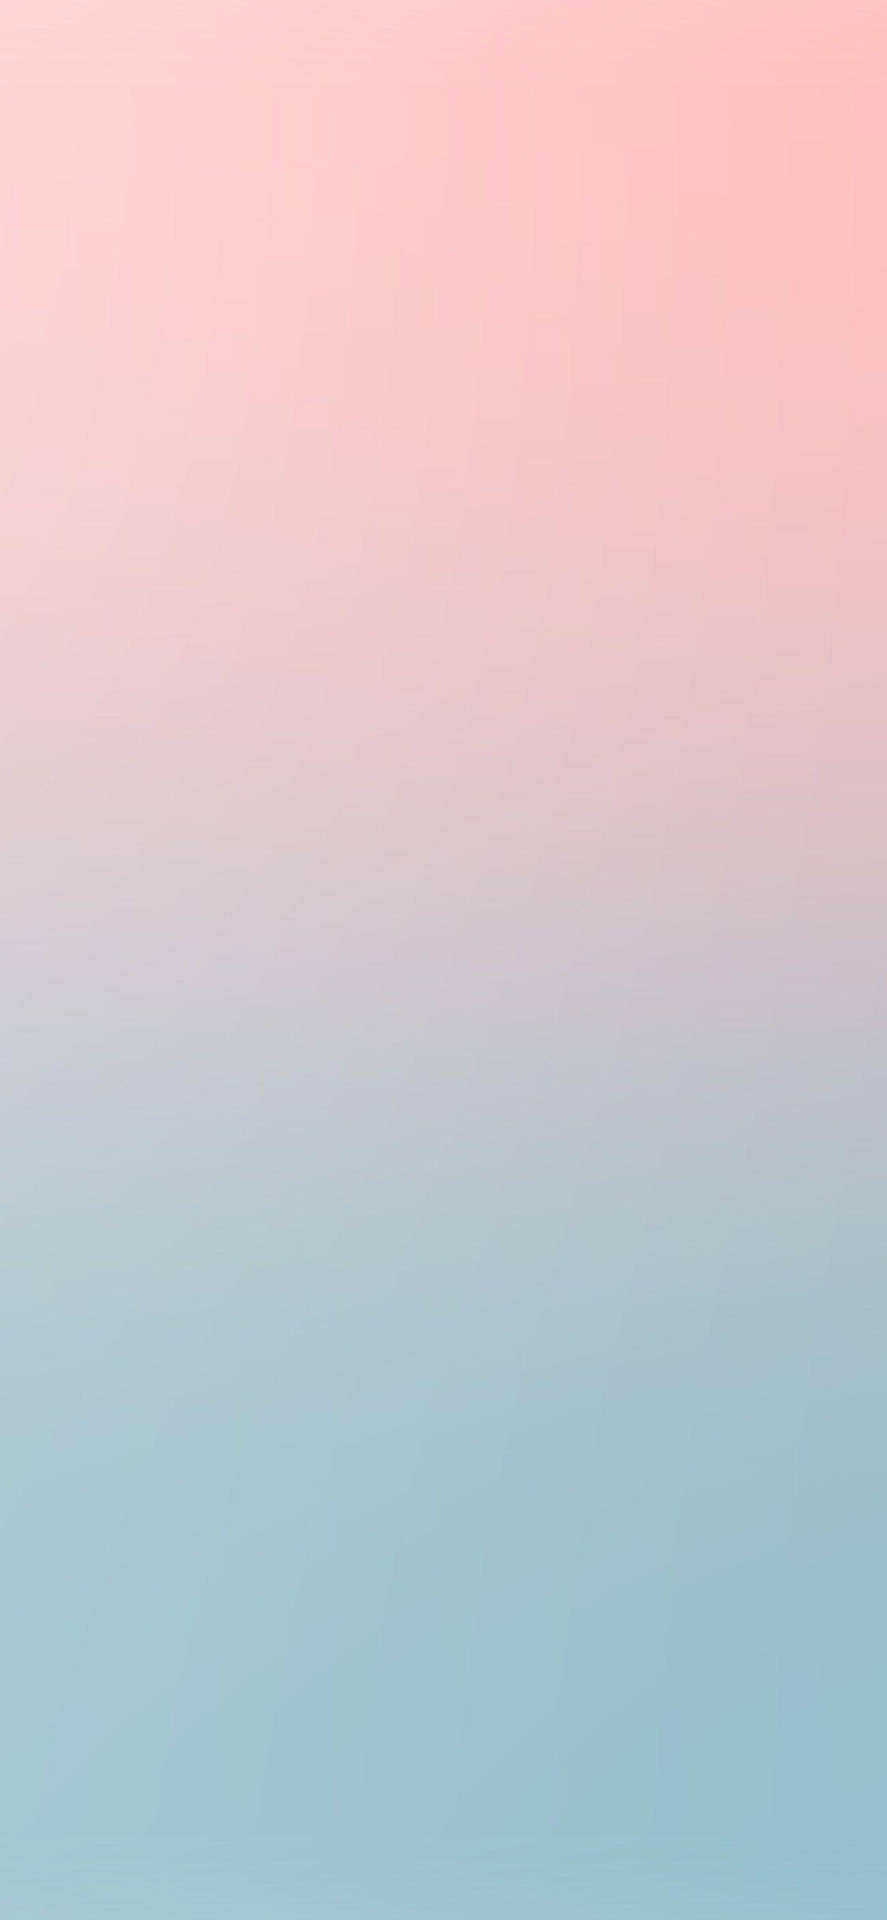 Pastel Iphone Pink And Blue Wallpaper